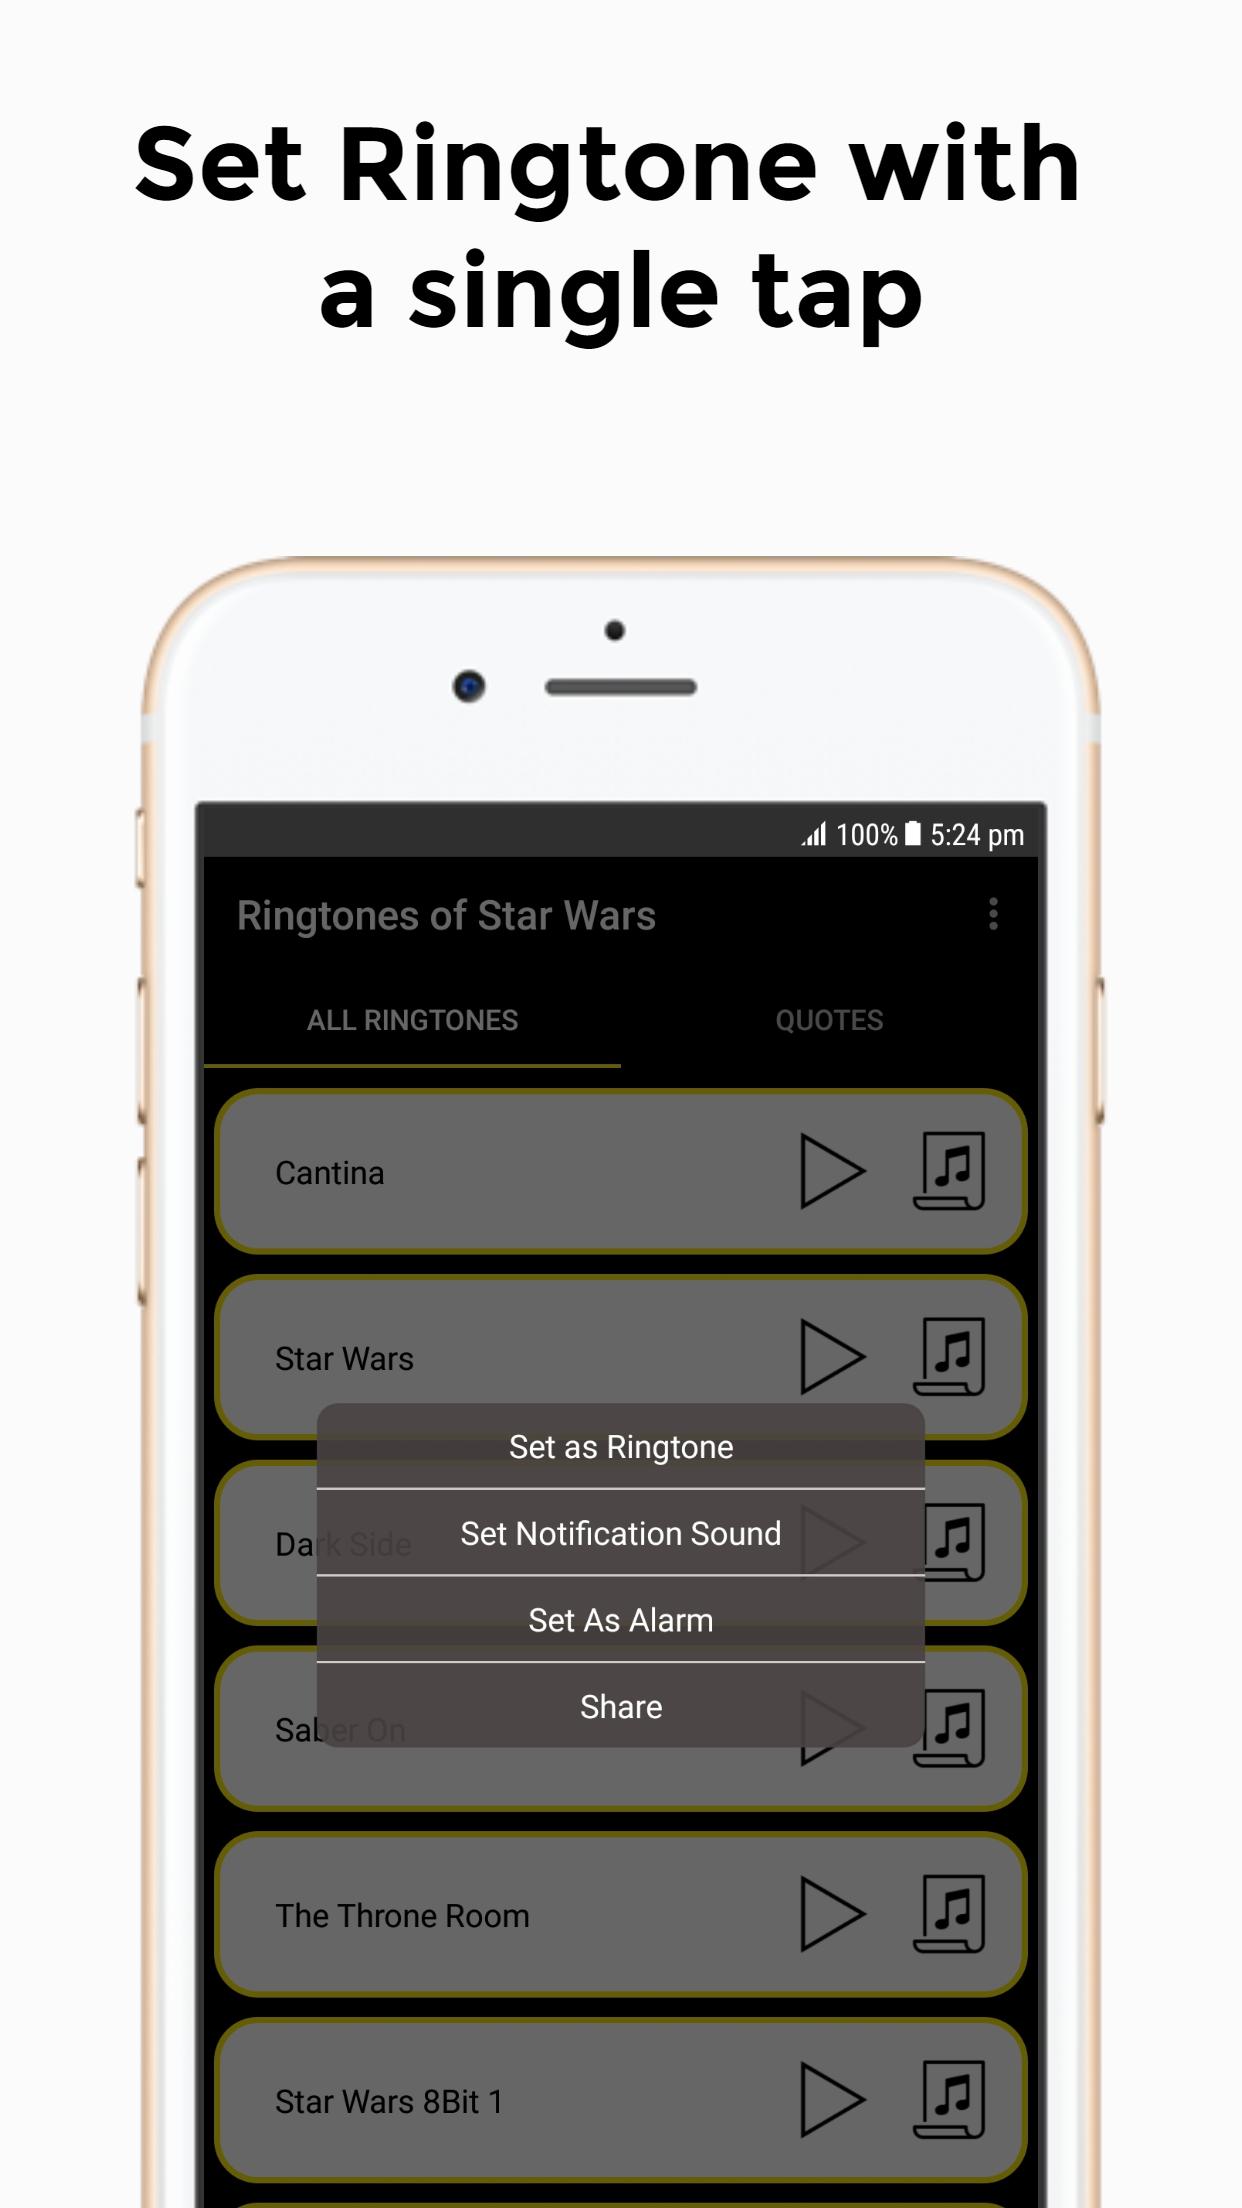 Ringtones of Star Wars for Android - APK Download